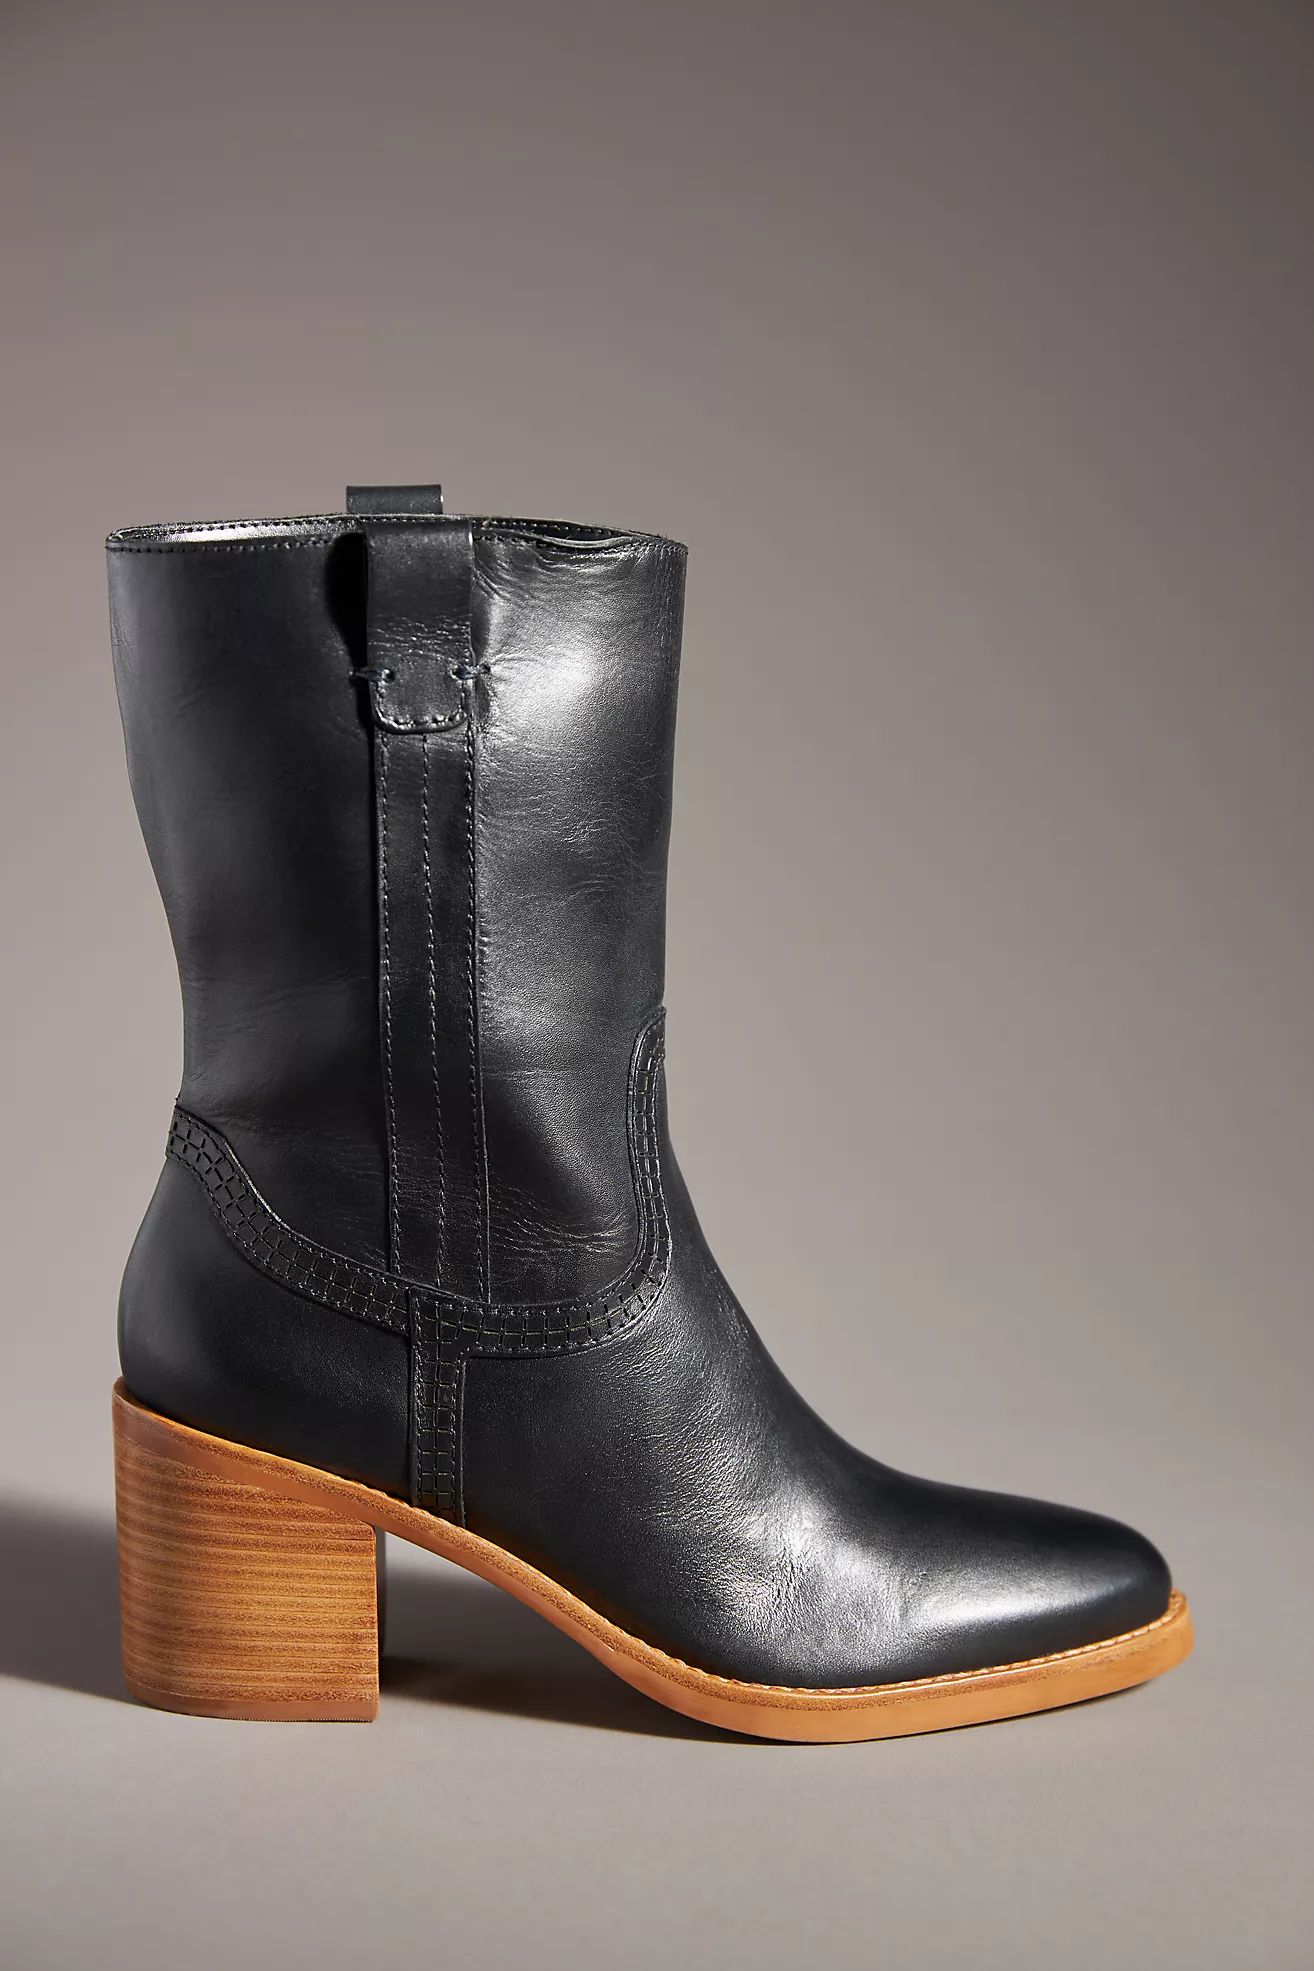 Dolce Vita Colete Boots | Anthropologie (US)